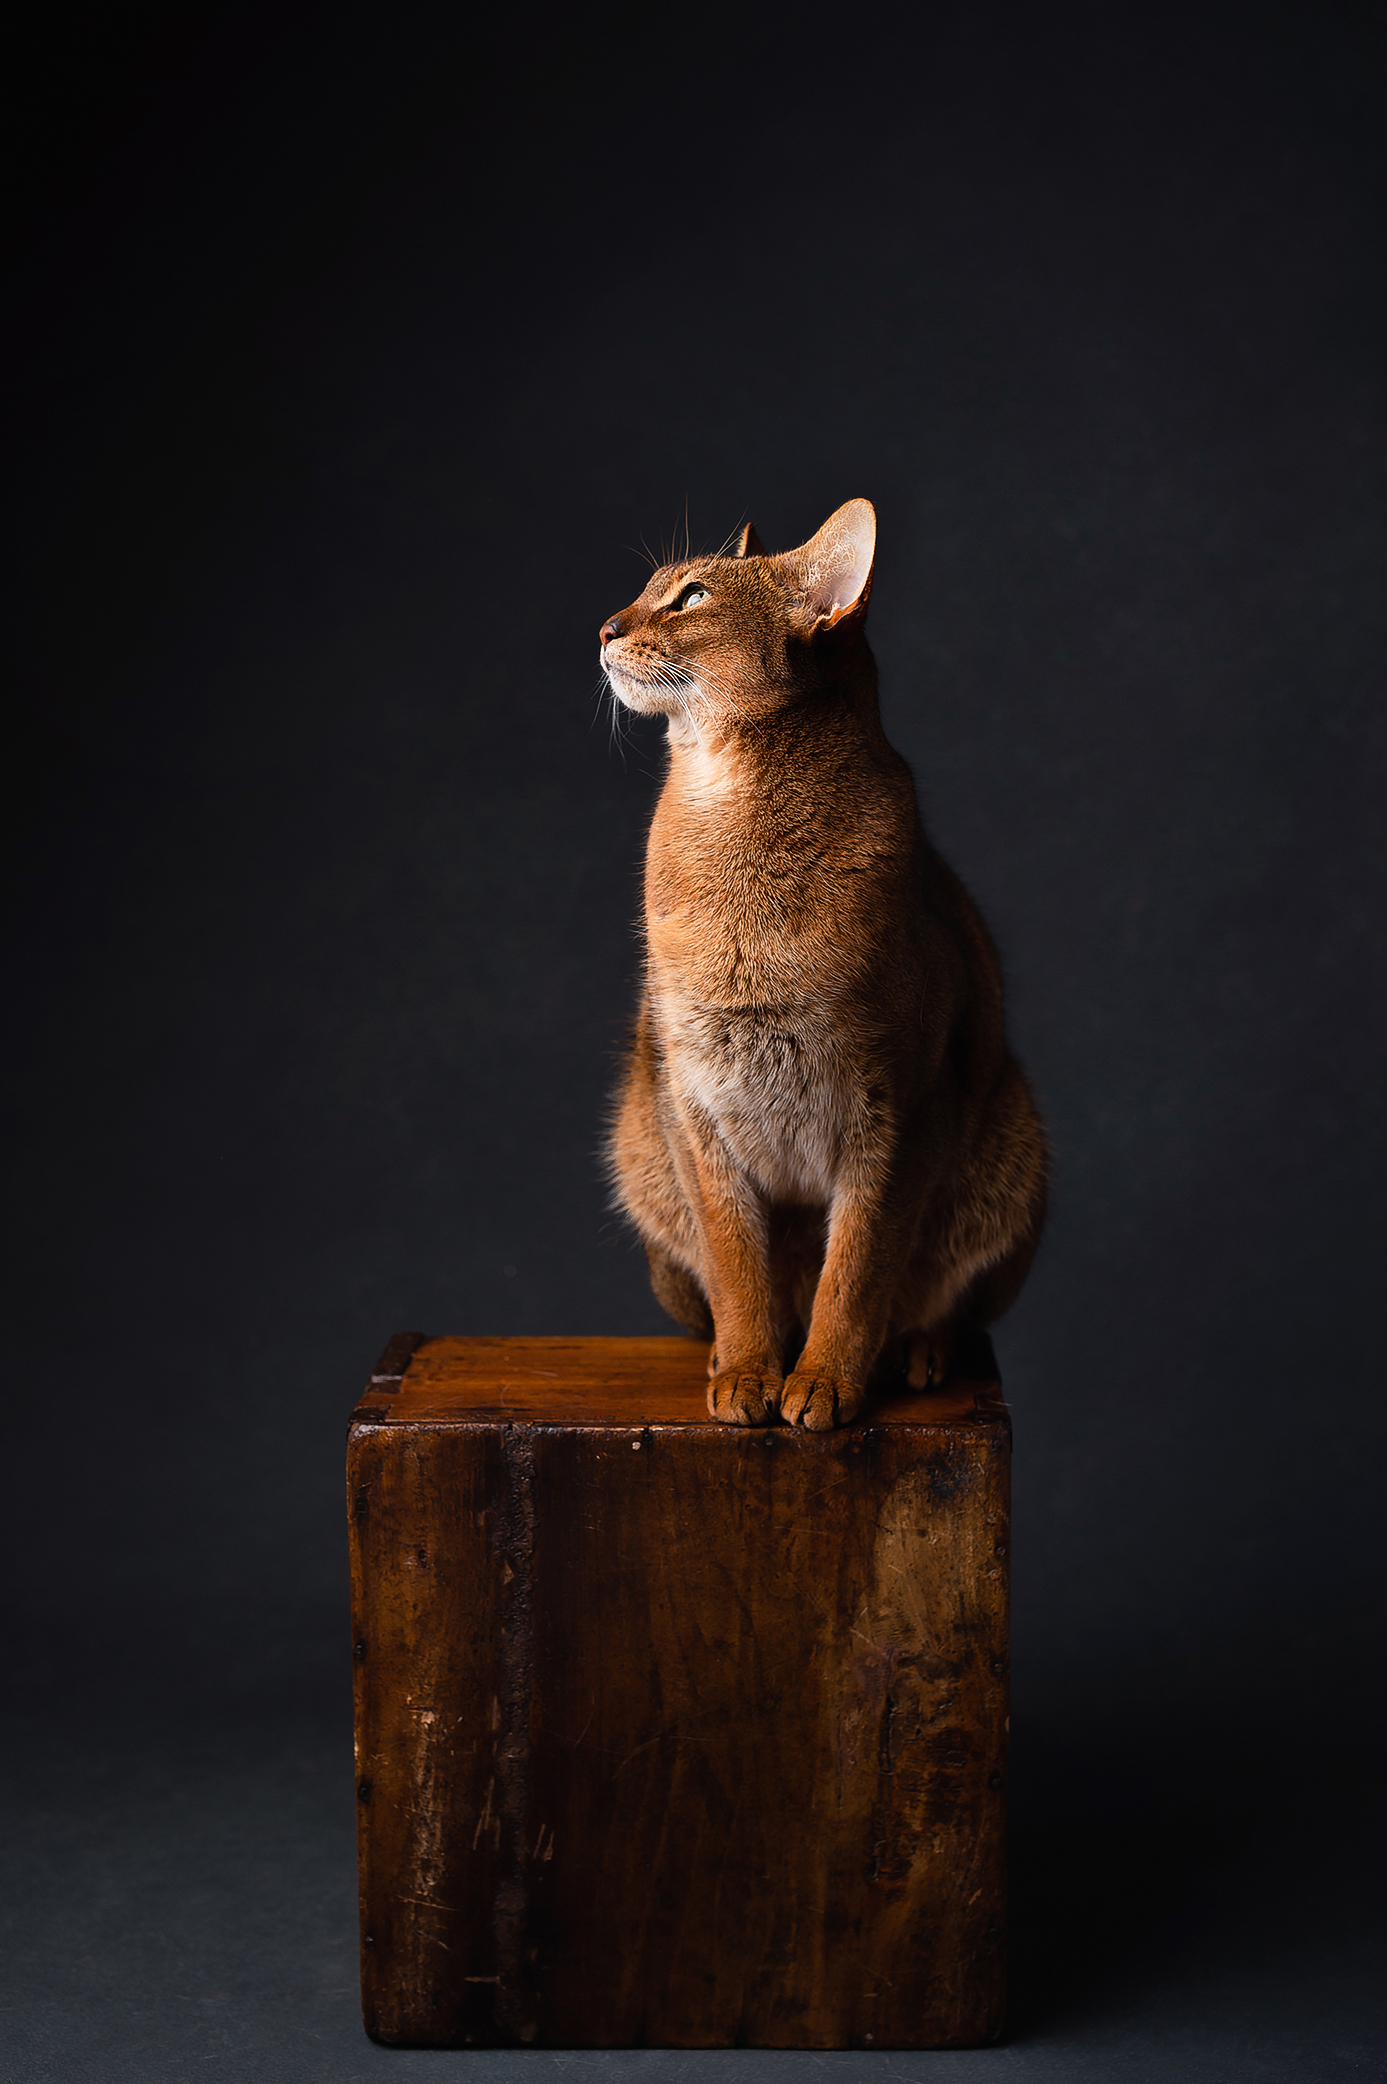 Abyssinian cat on the wooden box looking towards the light